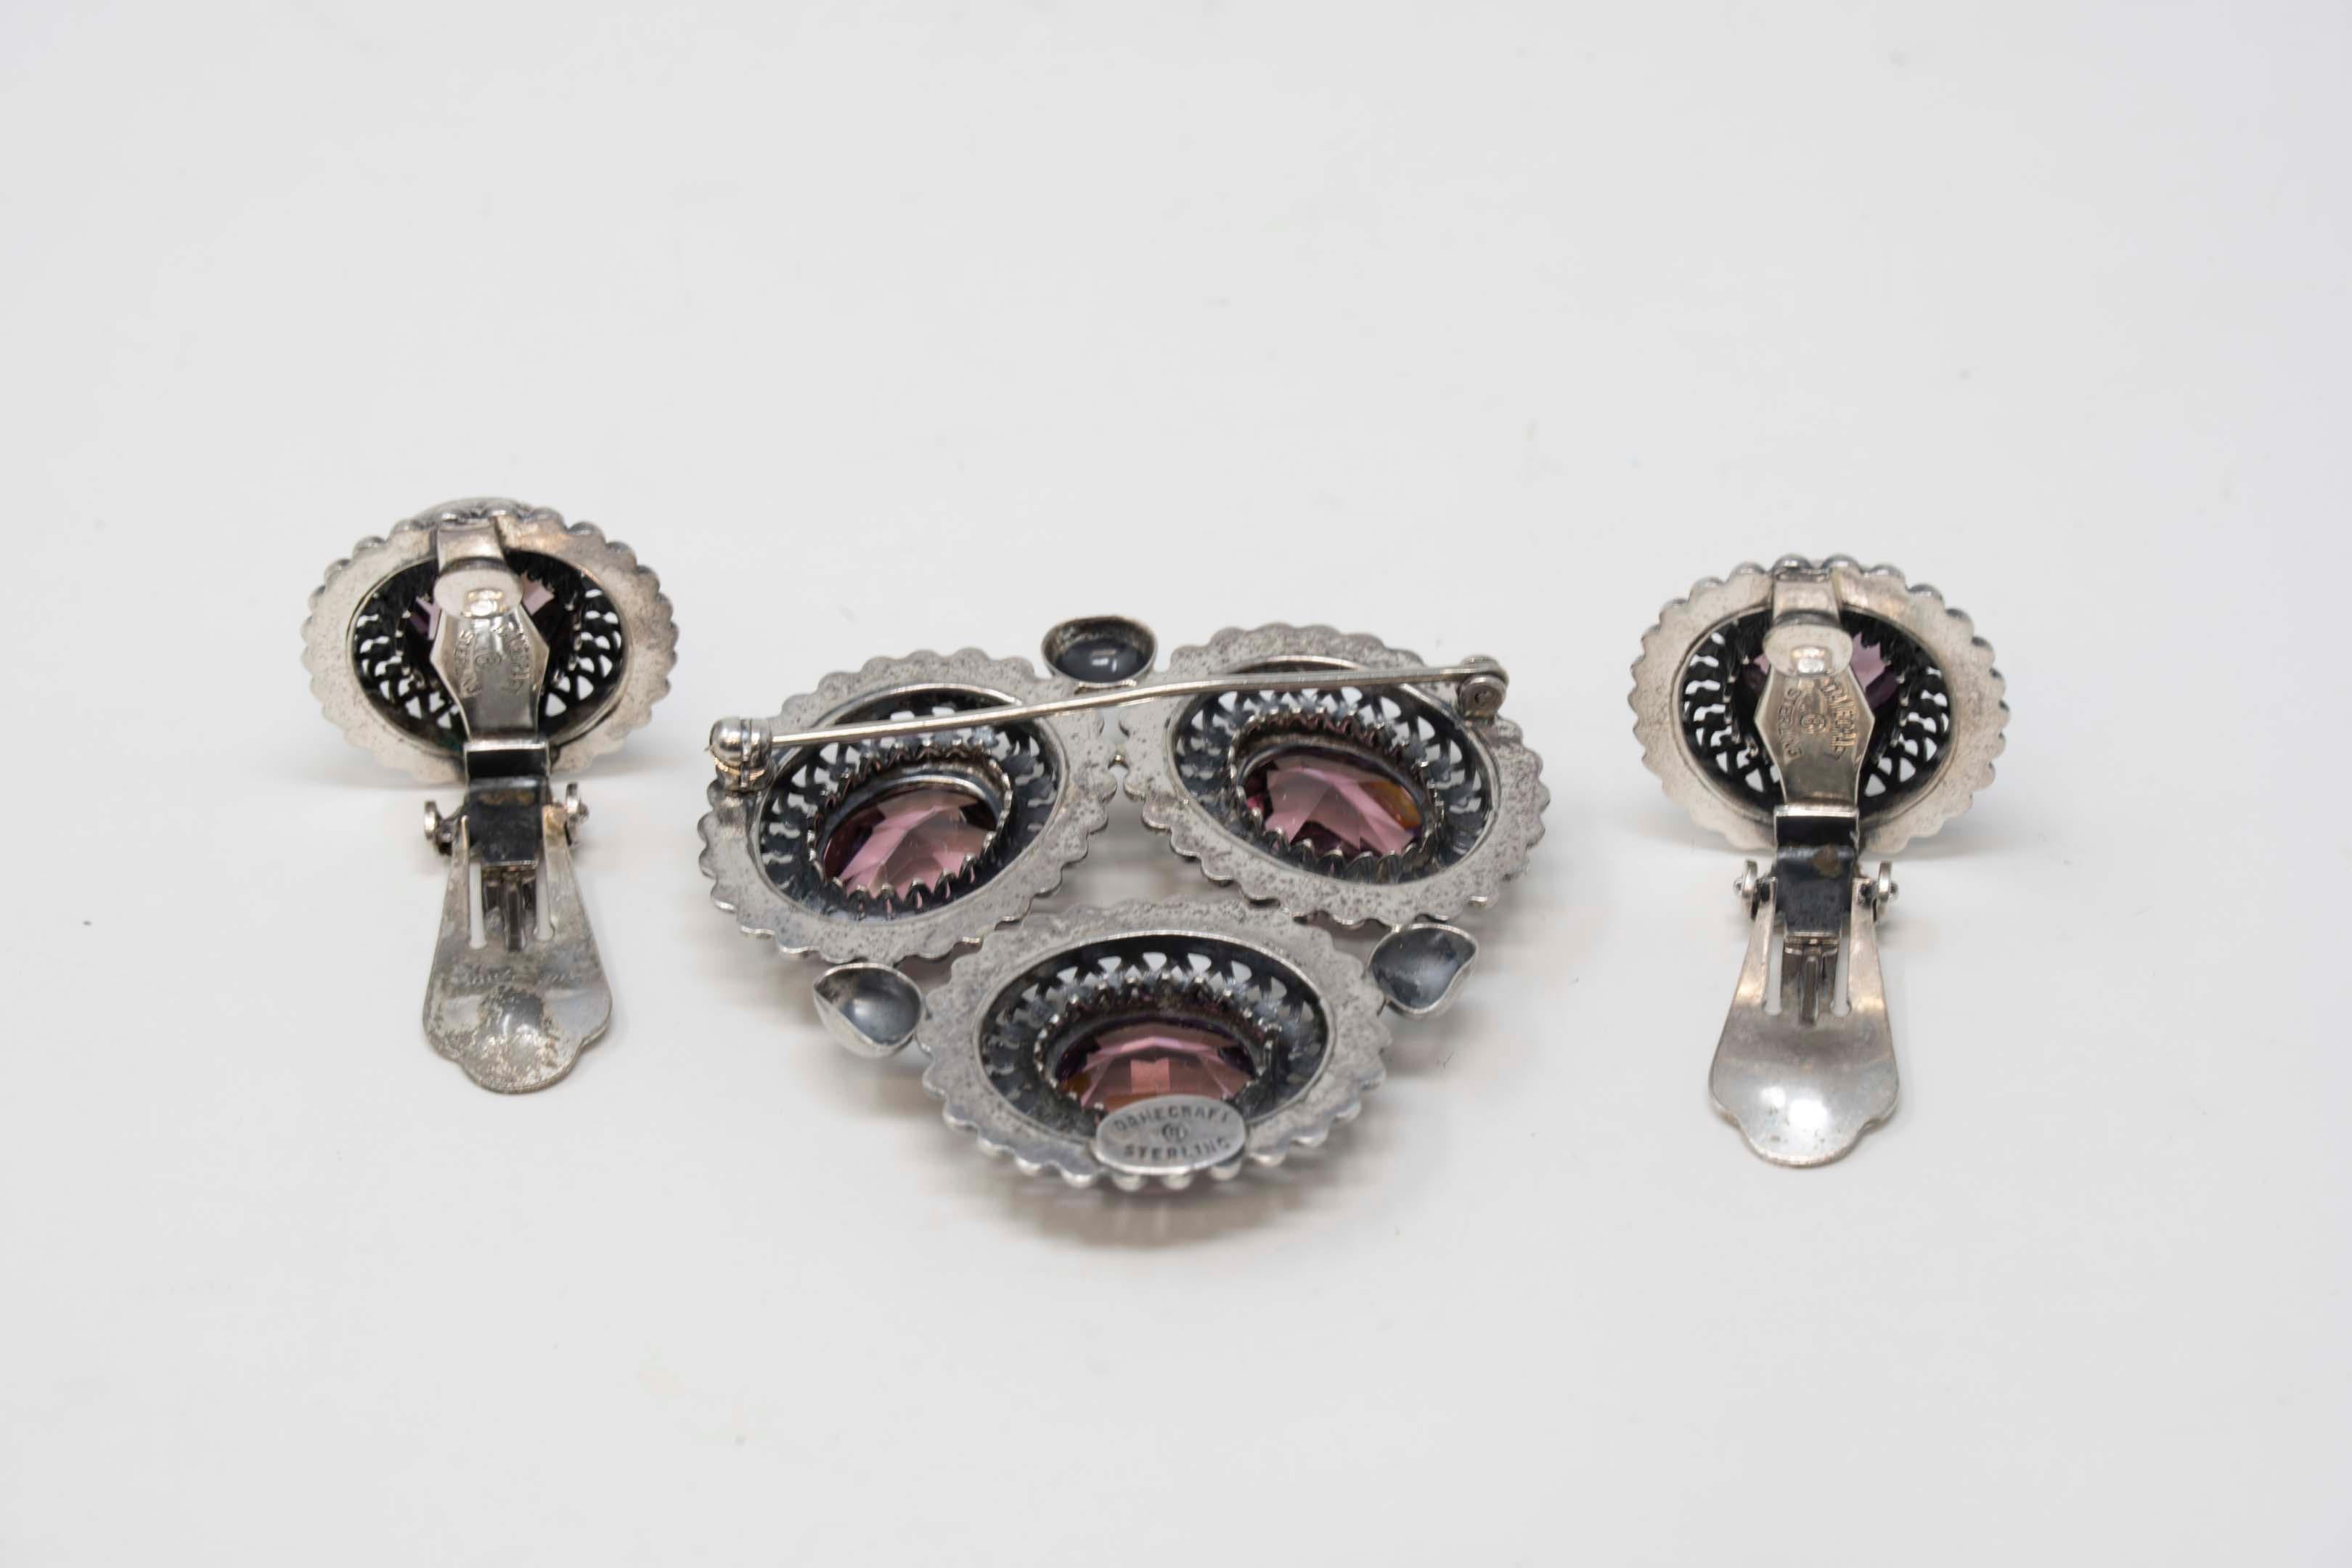 Vintage art deco style Danecraft sterling silver set of brooch and clip-on earrings with amethyst glass stones. Made in USA circa 1950-60. Stamped on the back, brooch measures 38mm long x 45mm wide. Each earring measures 25mm x 20mm. In good